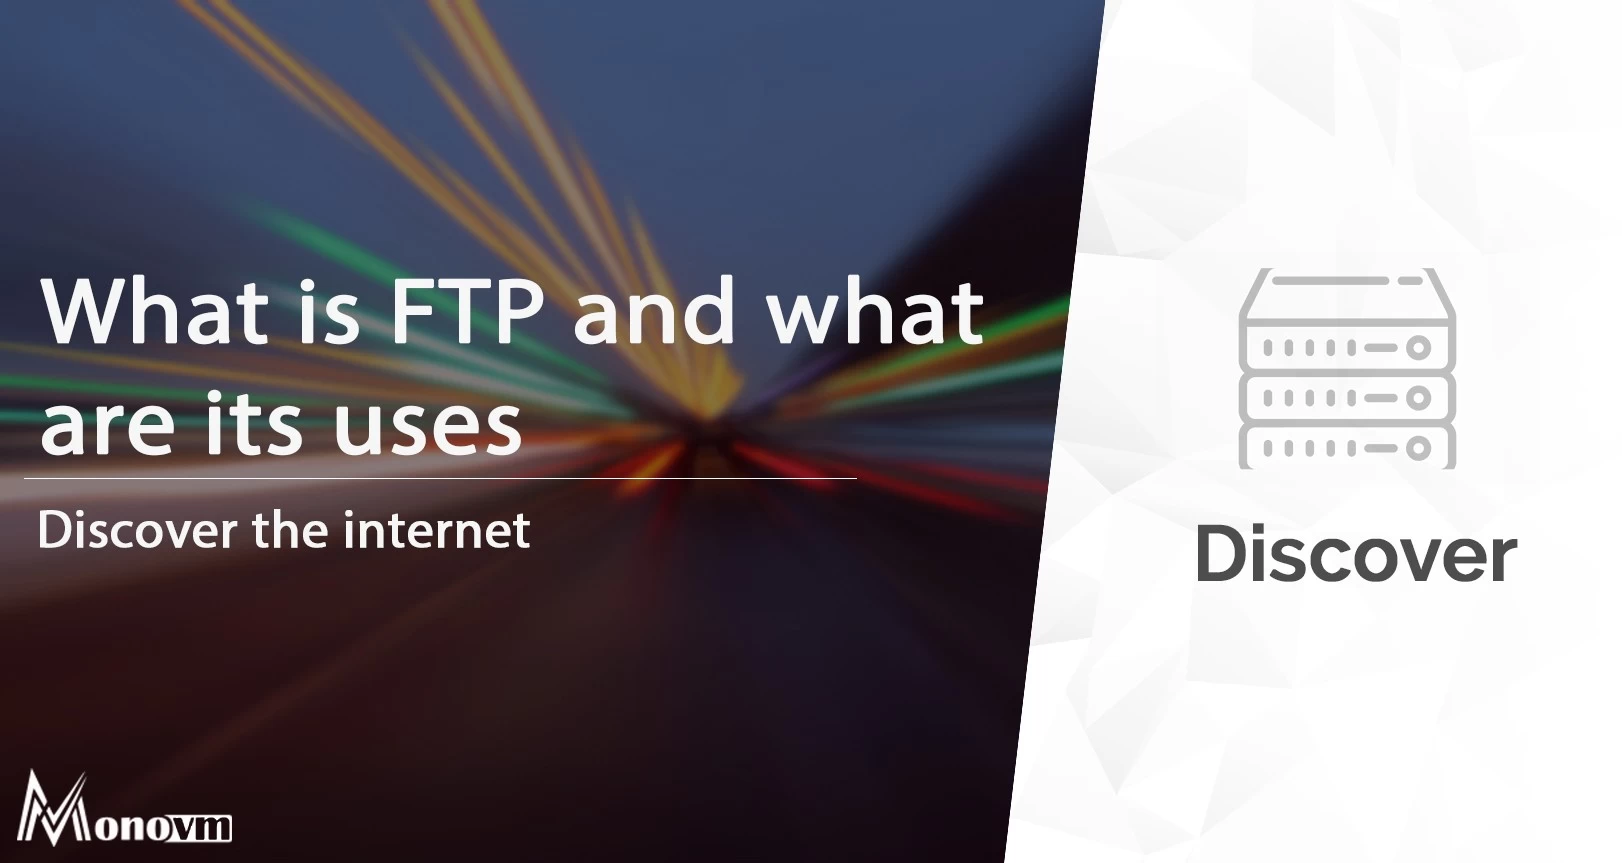 What Is FTP? File Transfer Protocol | What is it Used for?